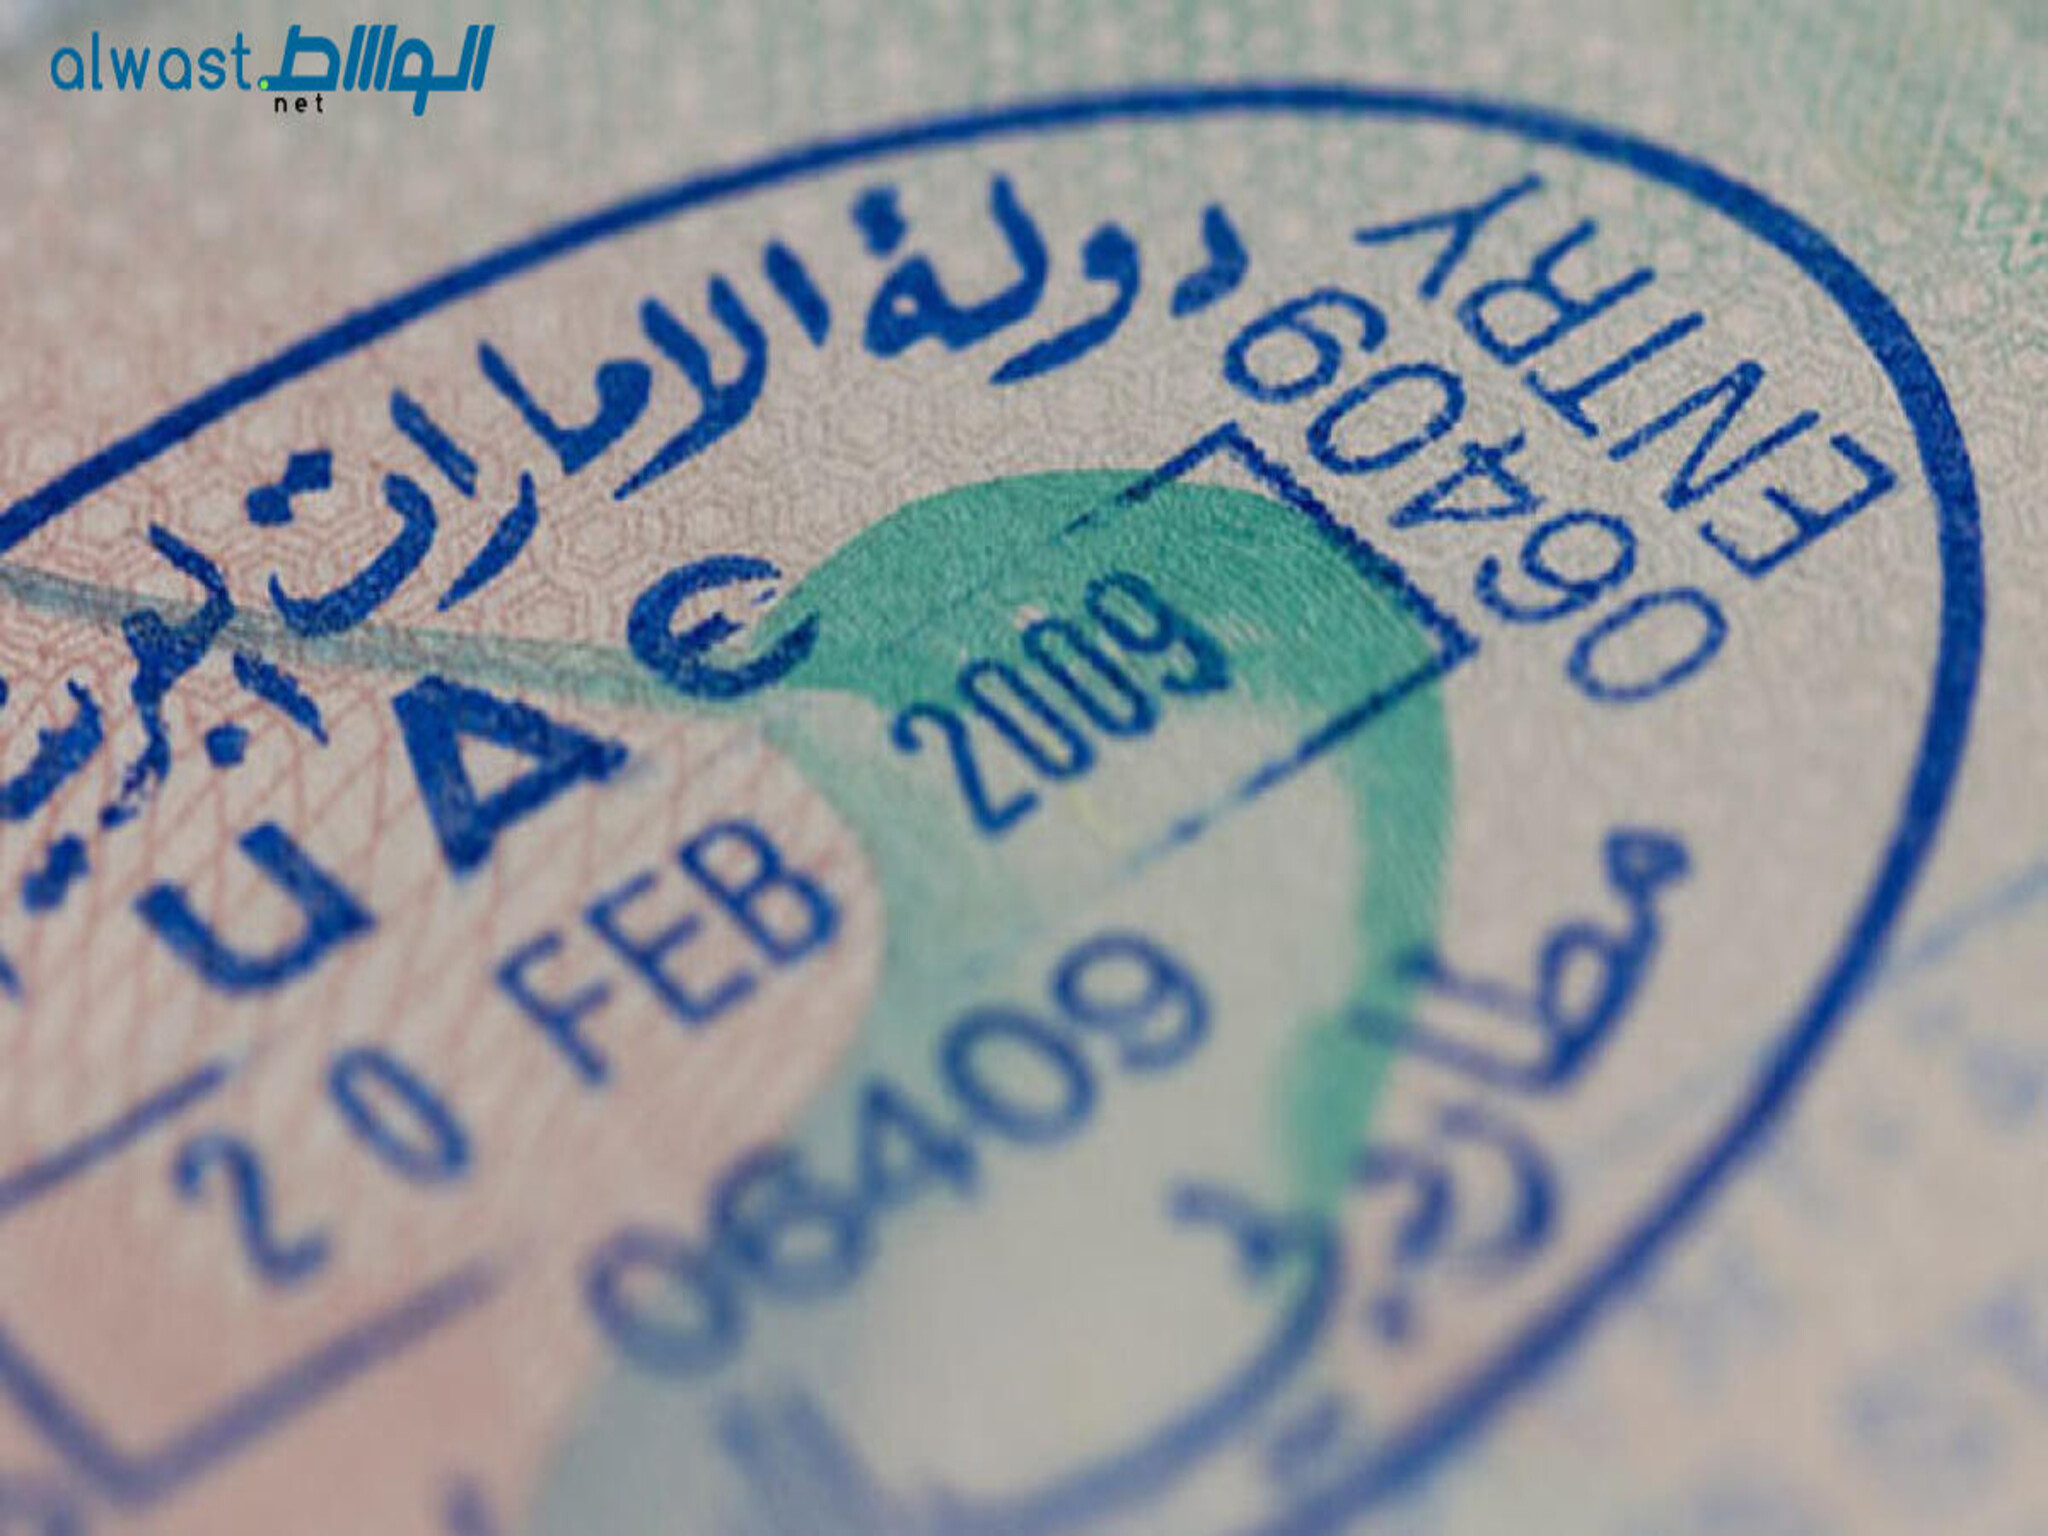 UAE: Family Visa Issuance Not Dependent on Applicant's Employment Type